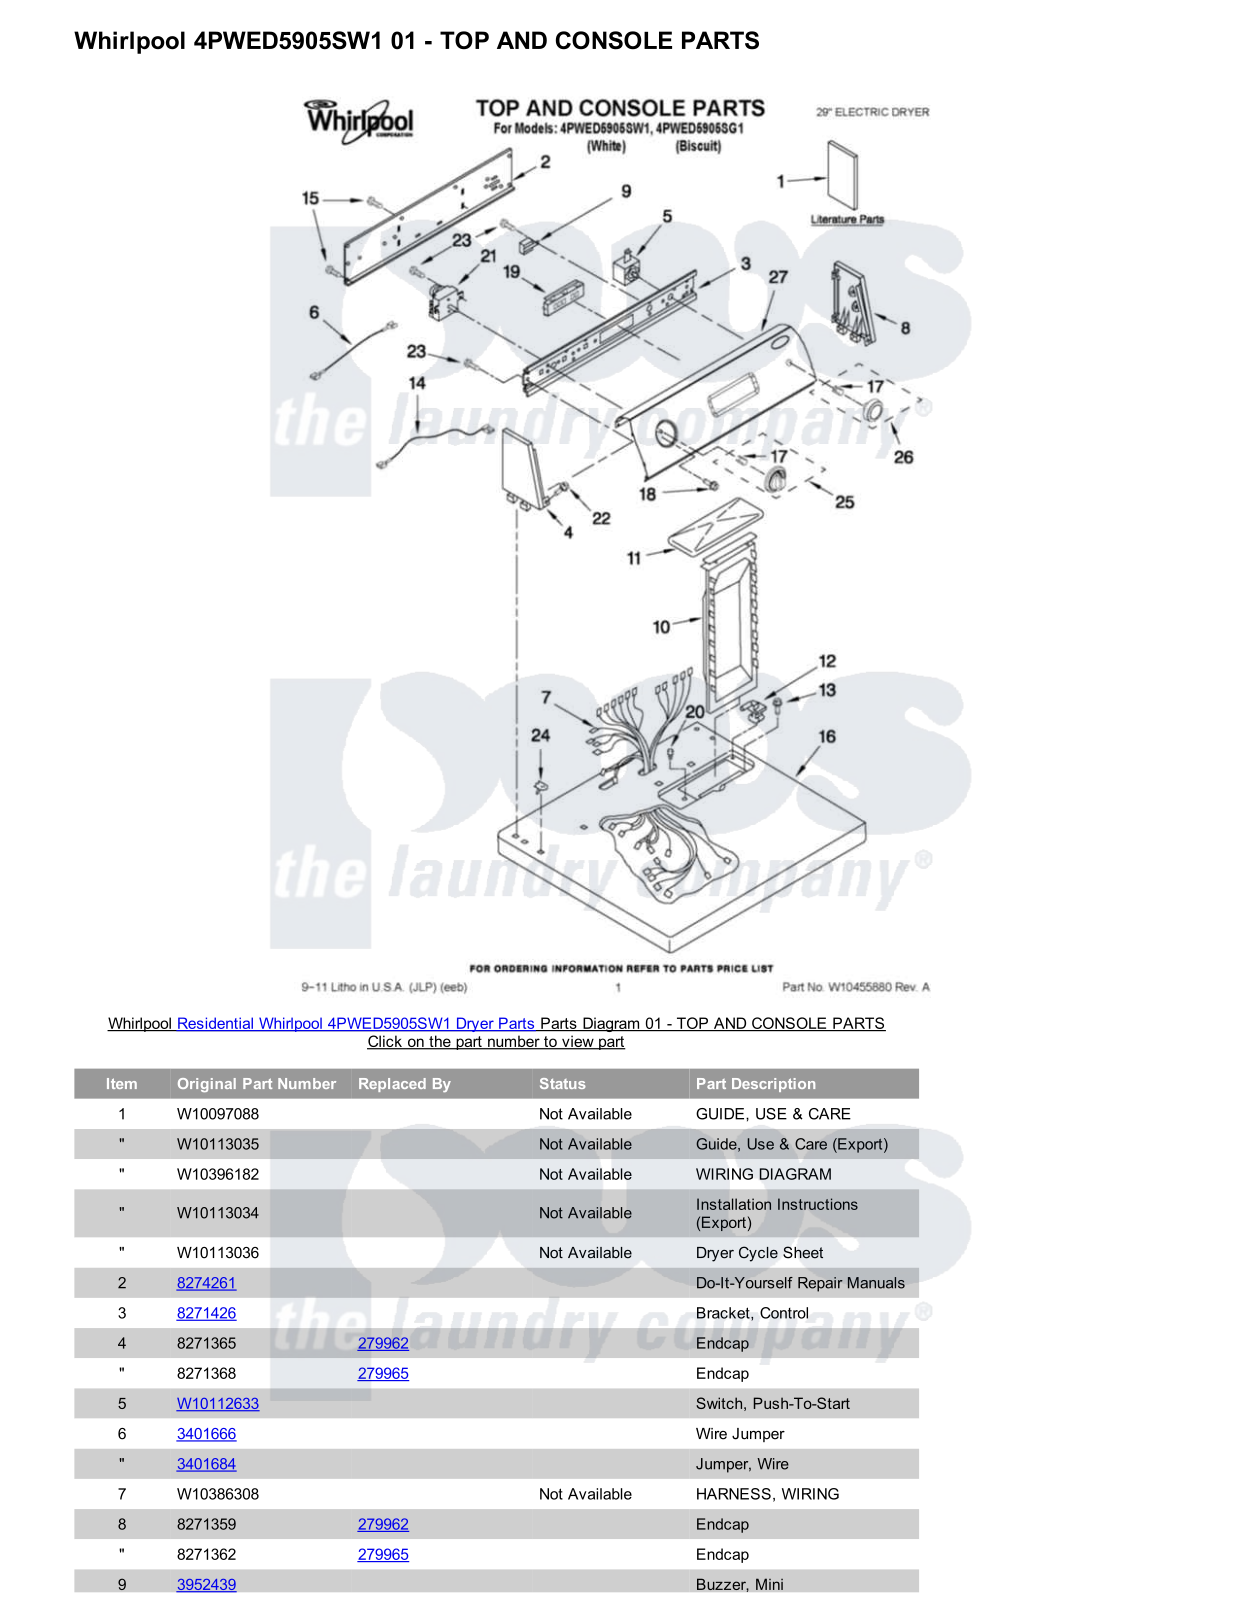 Whirlpool 4PWED5905SW1 Parts Diagram